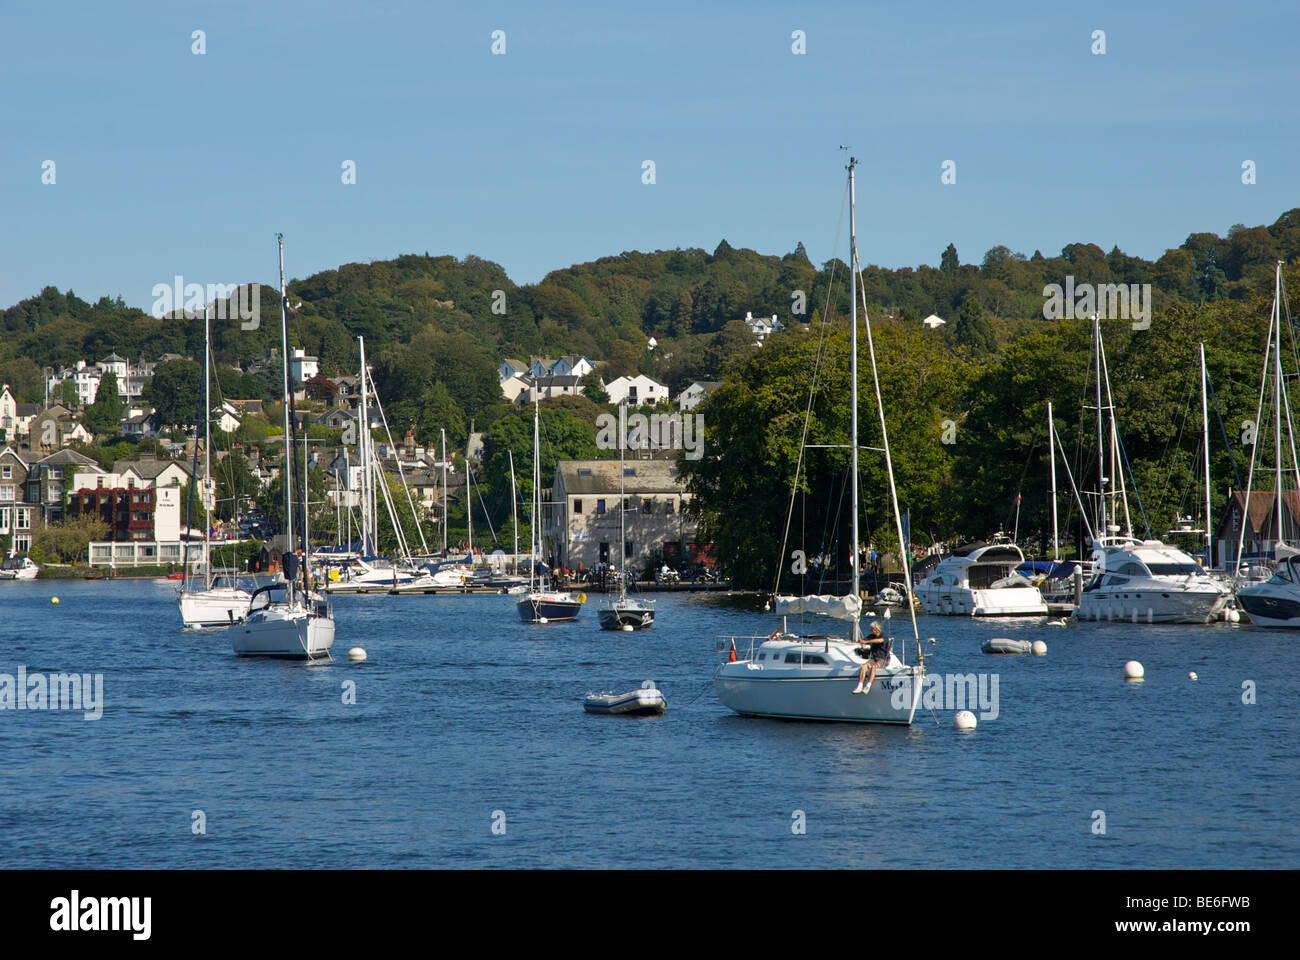 Boating in Bowness Bay, Bowness-on-Windermere, Lake District National Park, Cumbria, England UK Stock Photo